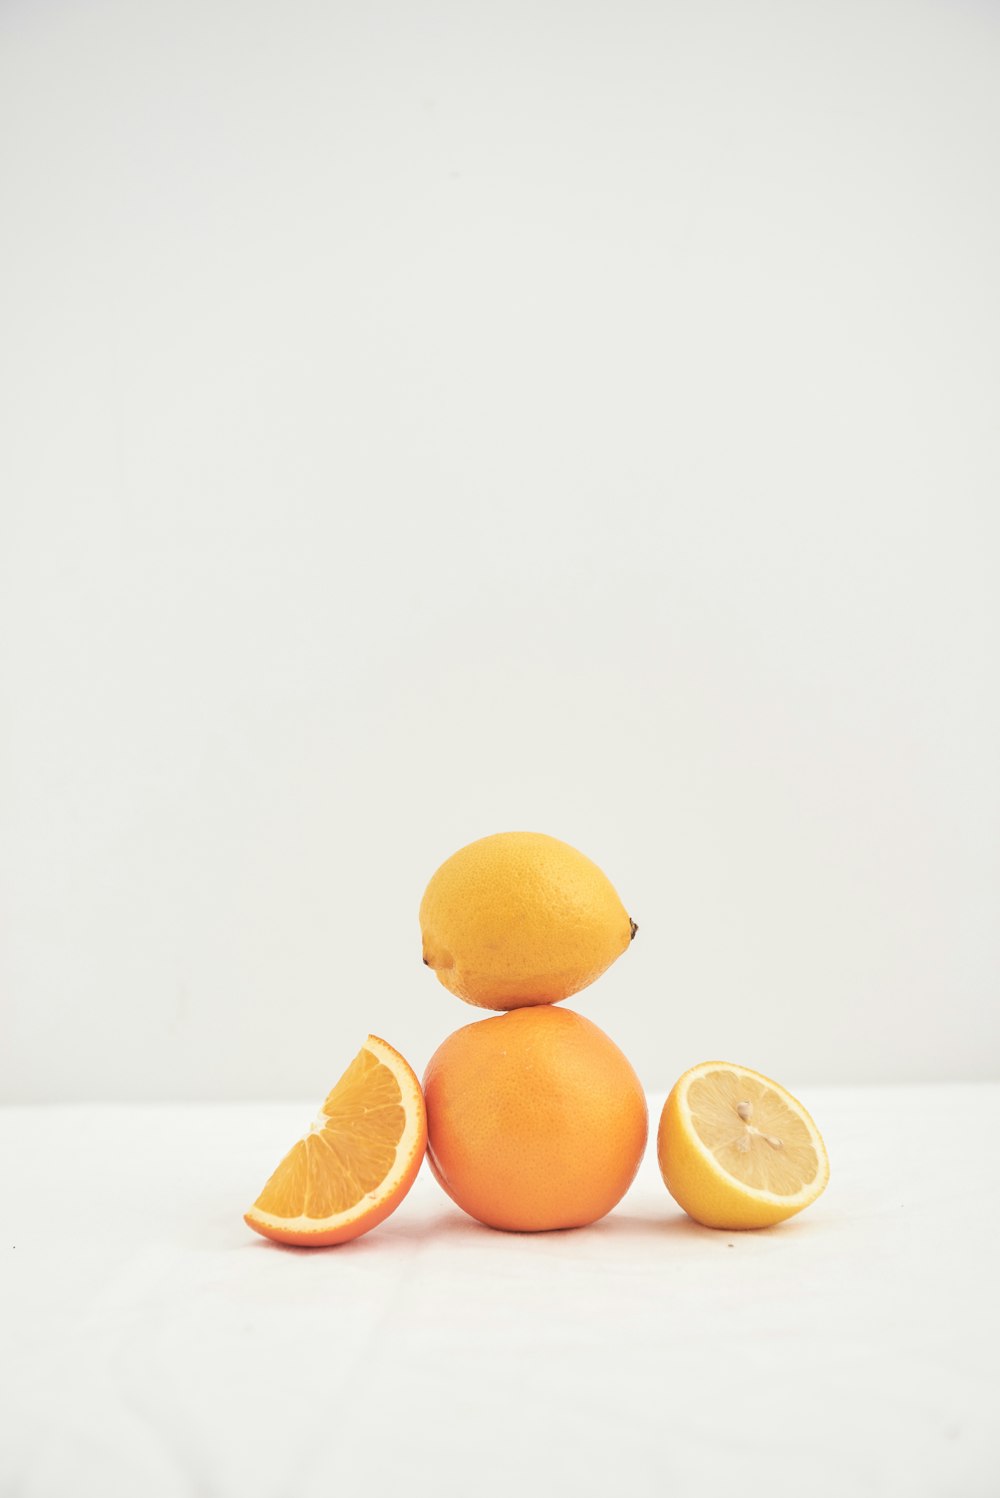 a group of oranges